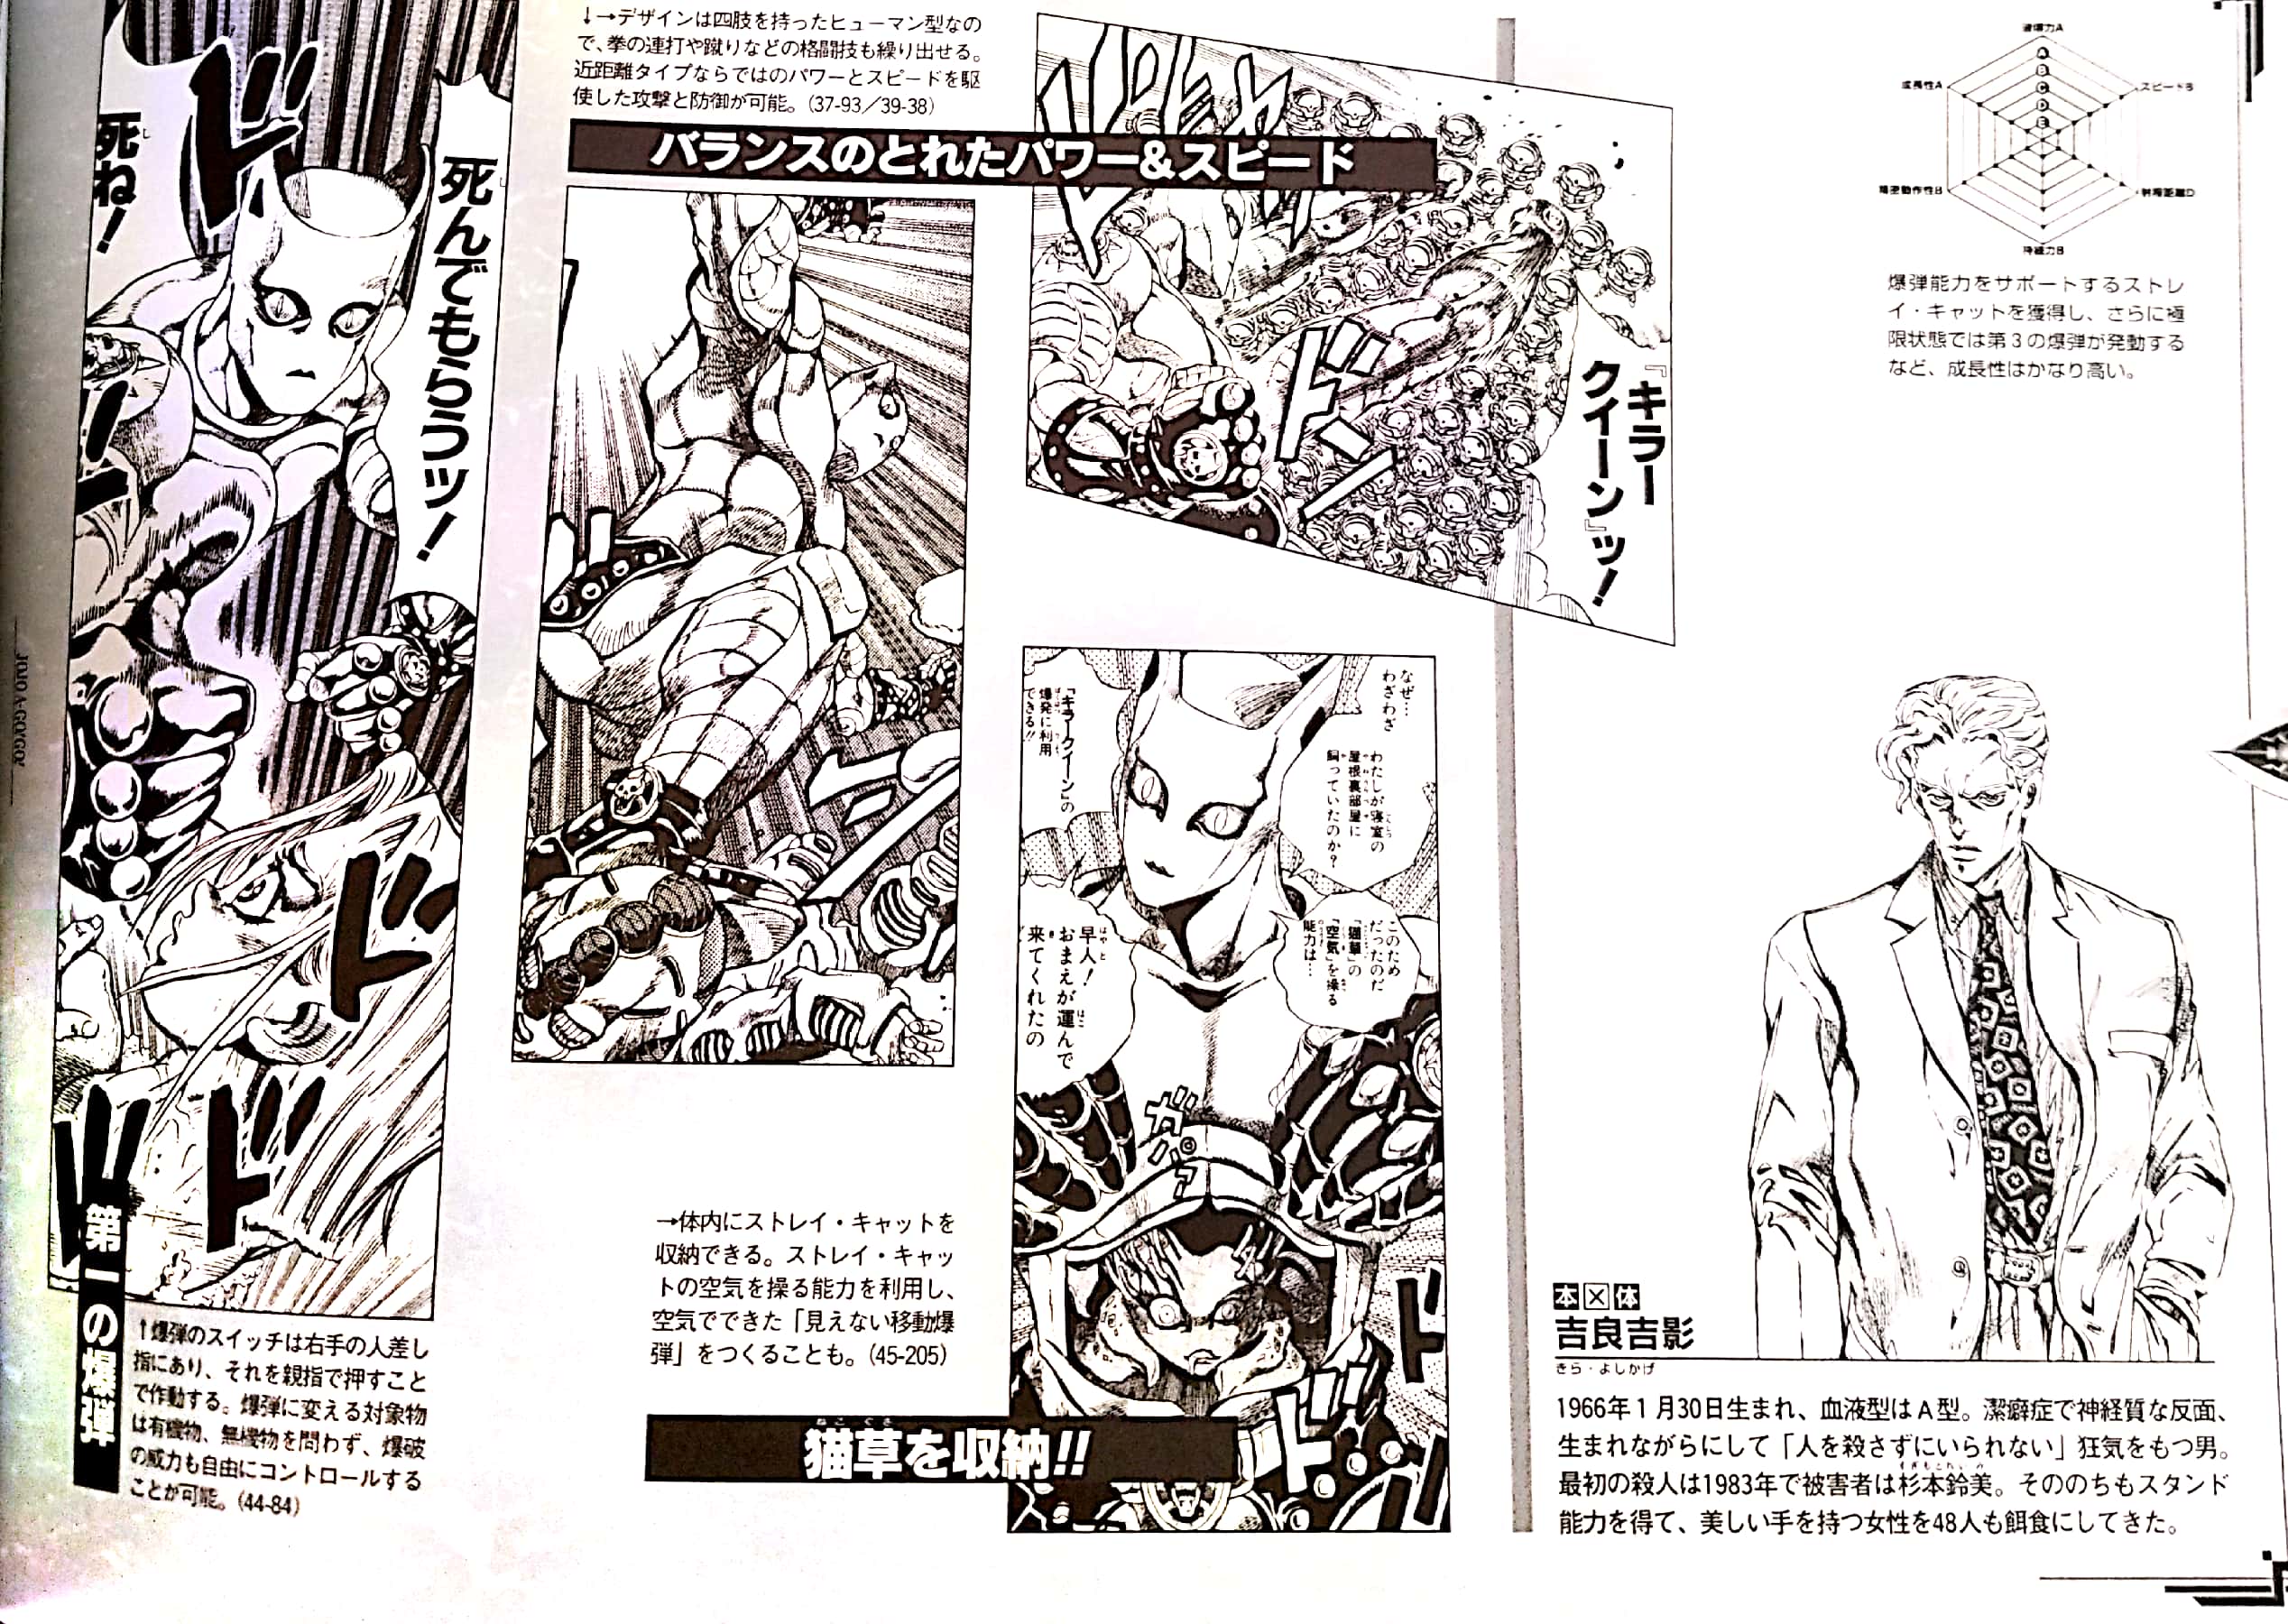 GUYS I DID IT! i translated killer queen's and creams pages from